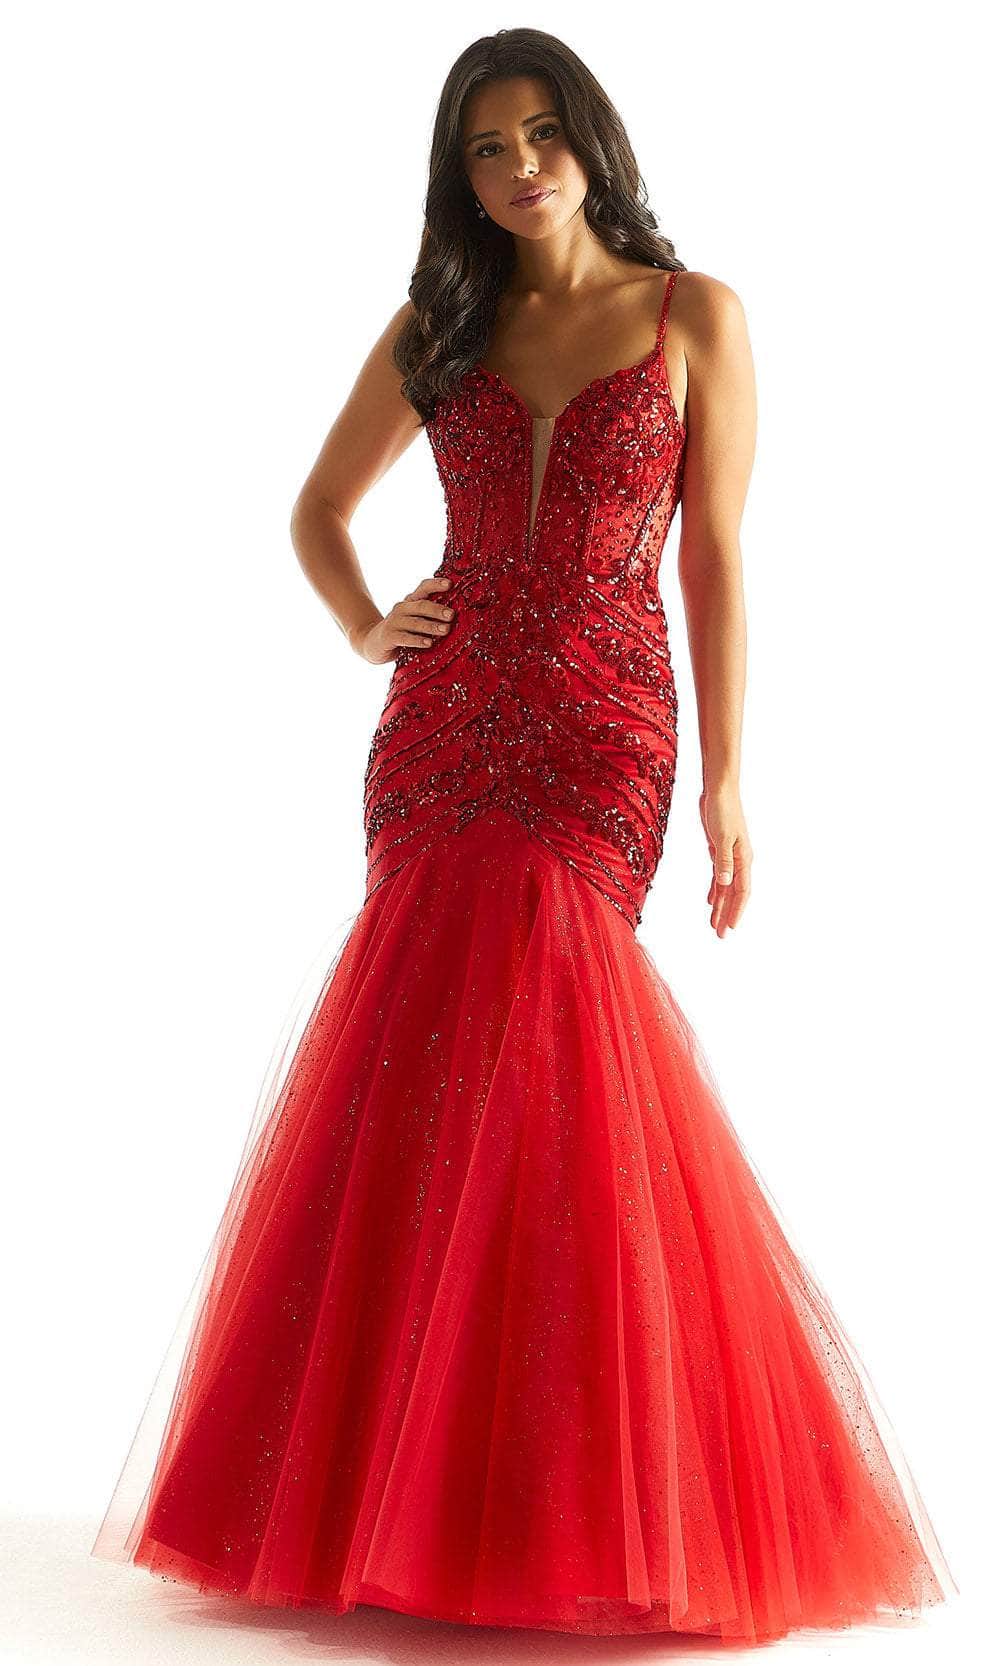 Mori Lee 49014 - Bead Patterned Prom Dress Prom Dress 00 /  Red